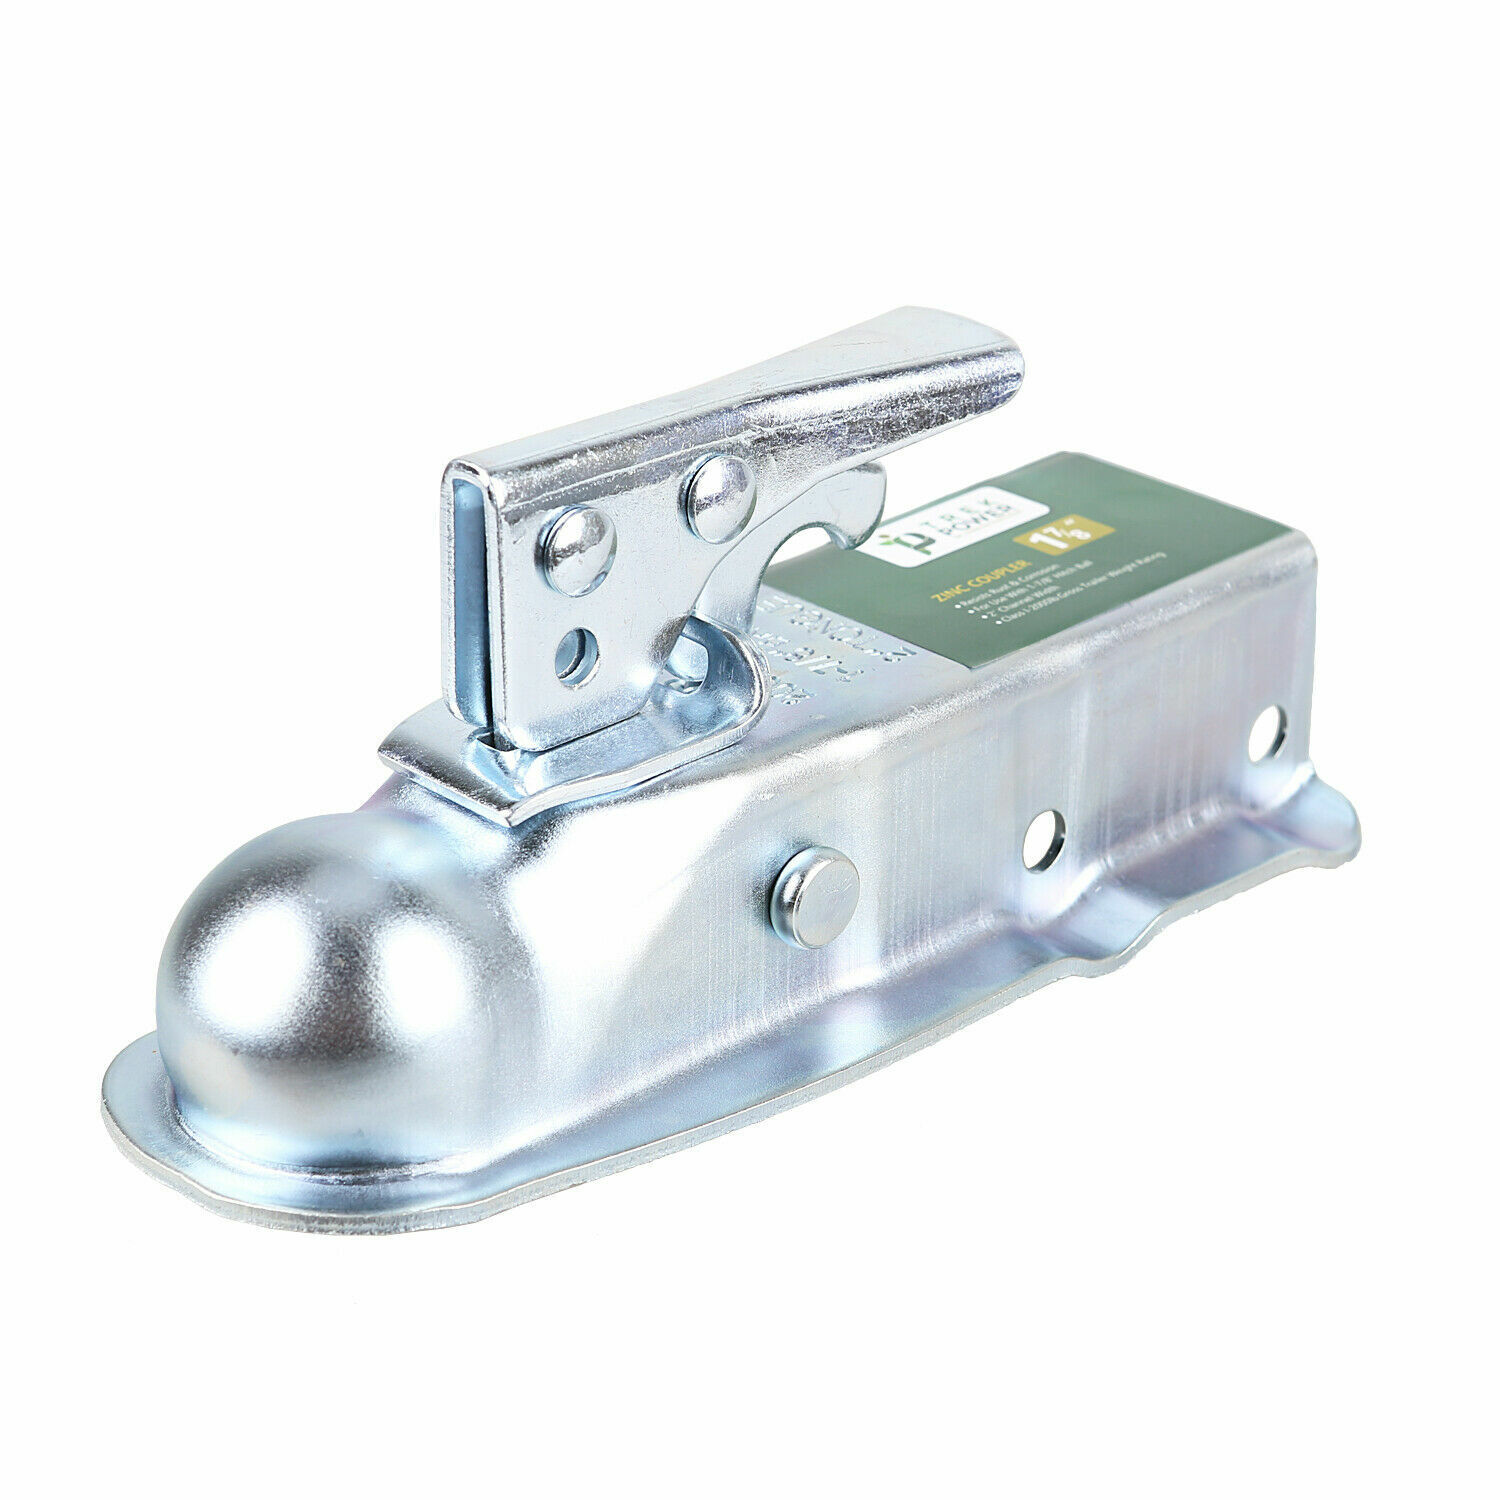 Straight-Tongue Trailer Coupler for 2-Inch Channel Accepts 1-7/8-Inch Hitch Ball